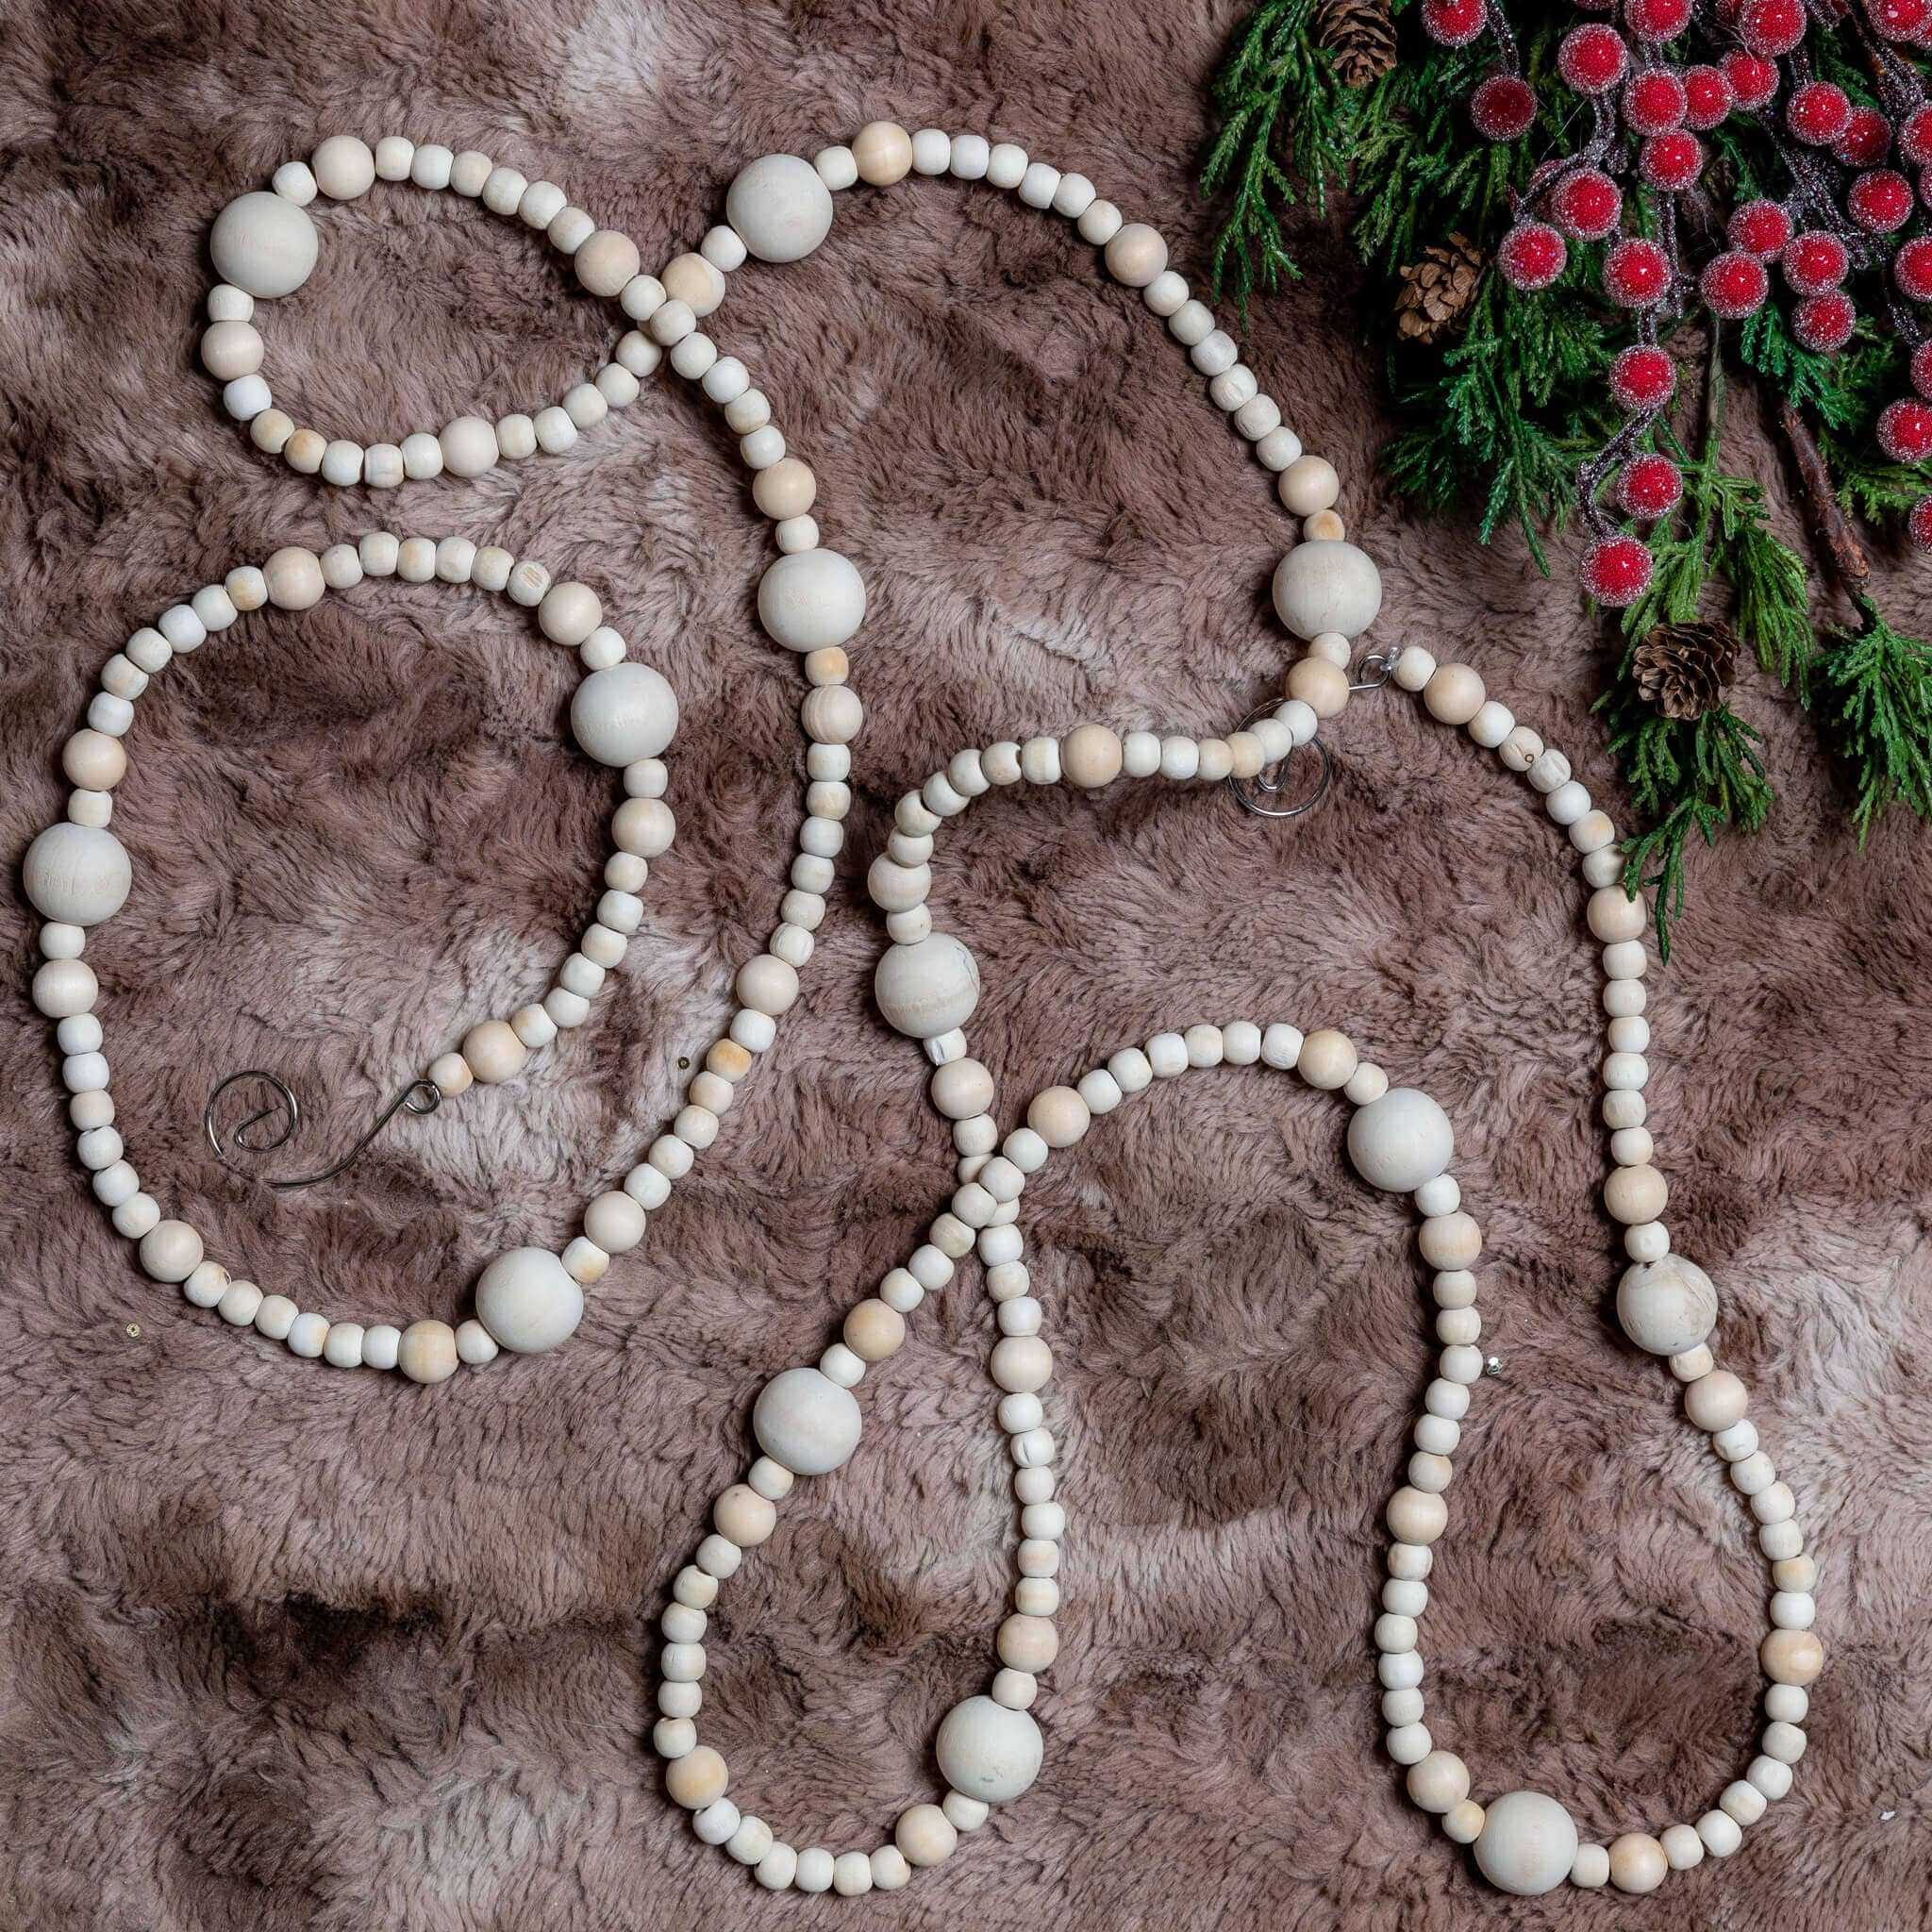 Red Beads Garland for Christmas Tree,66 Feet Plastic Pearl Strands